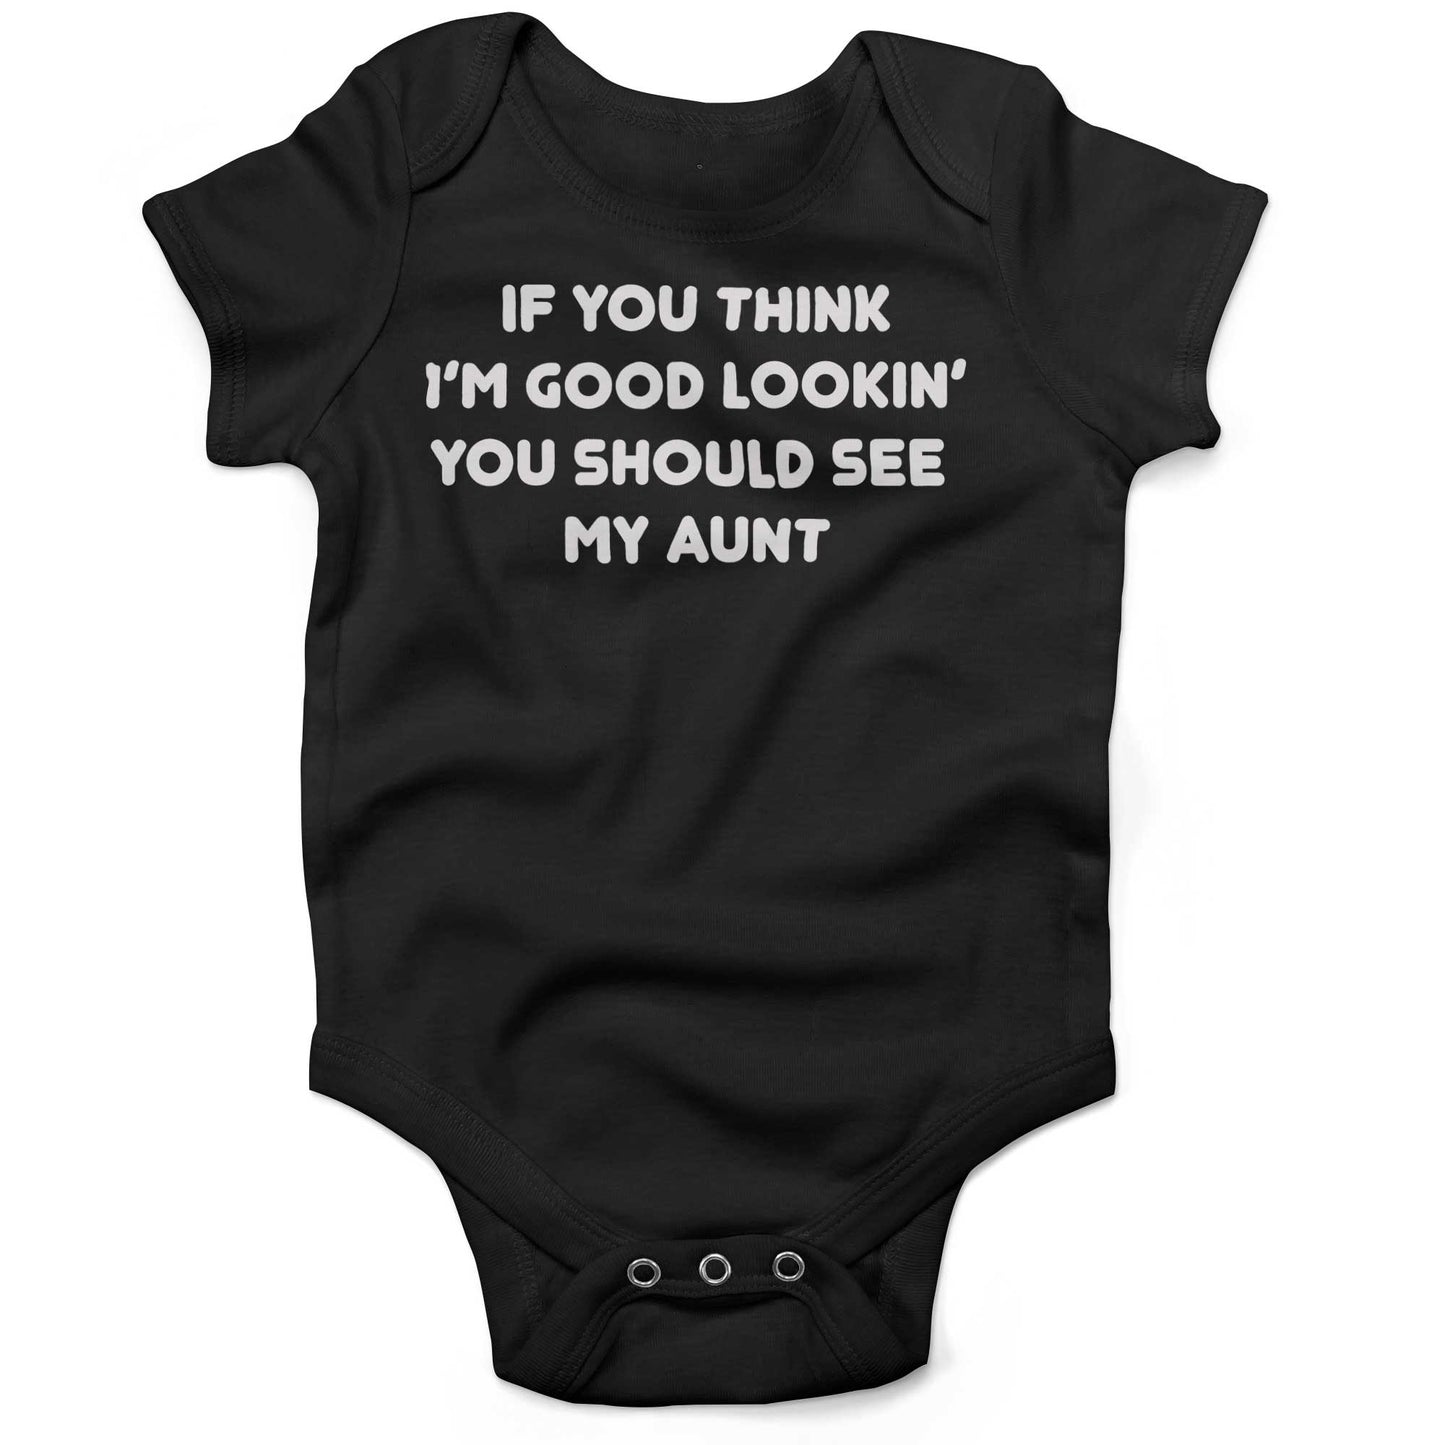 If You Think I'm Good Lookin' You Should See My Aunt Infant Bodysuit or Raglan Tee-Organic Black-3-6 months